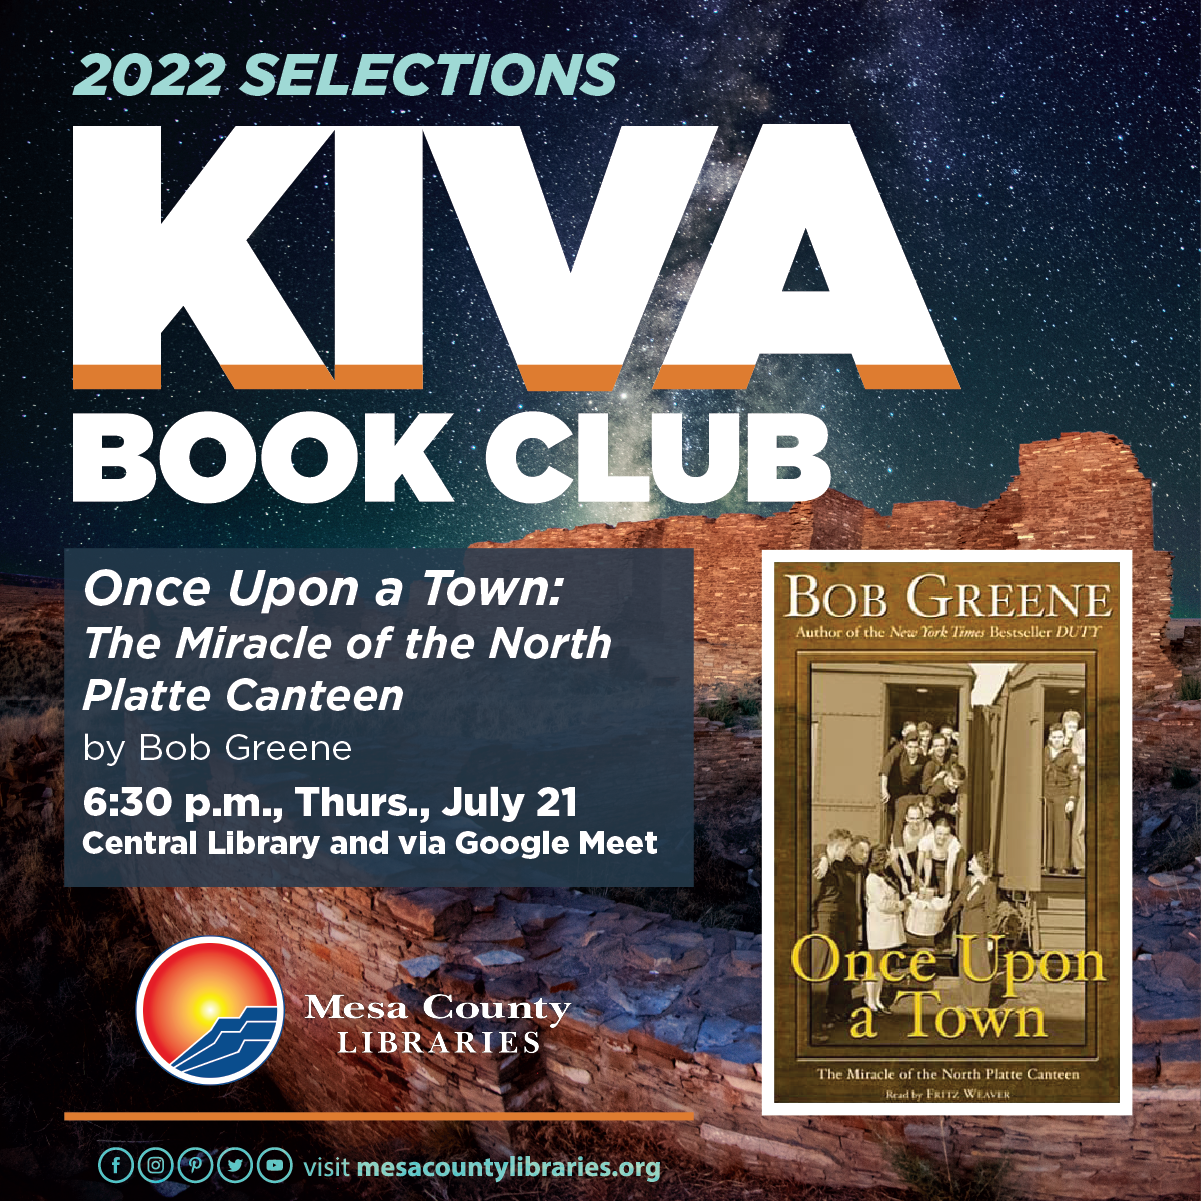 Kiva Book Club: "Once Upon A Town: The Miracle of the North Platte Canteen"